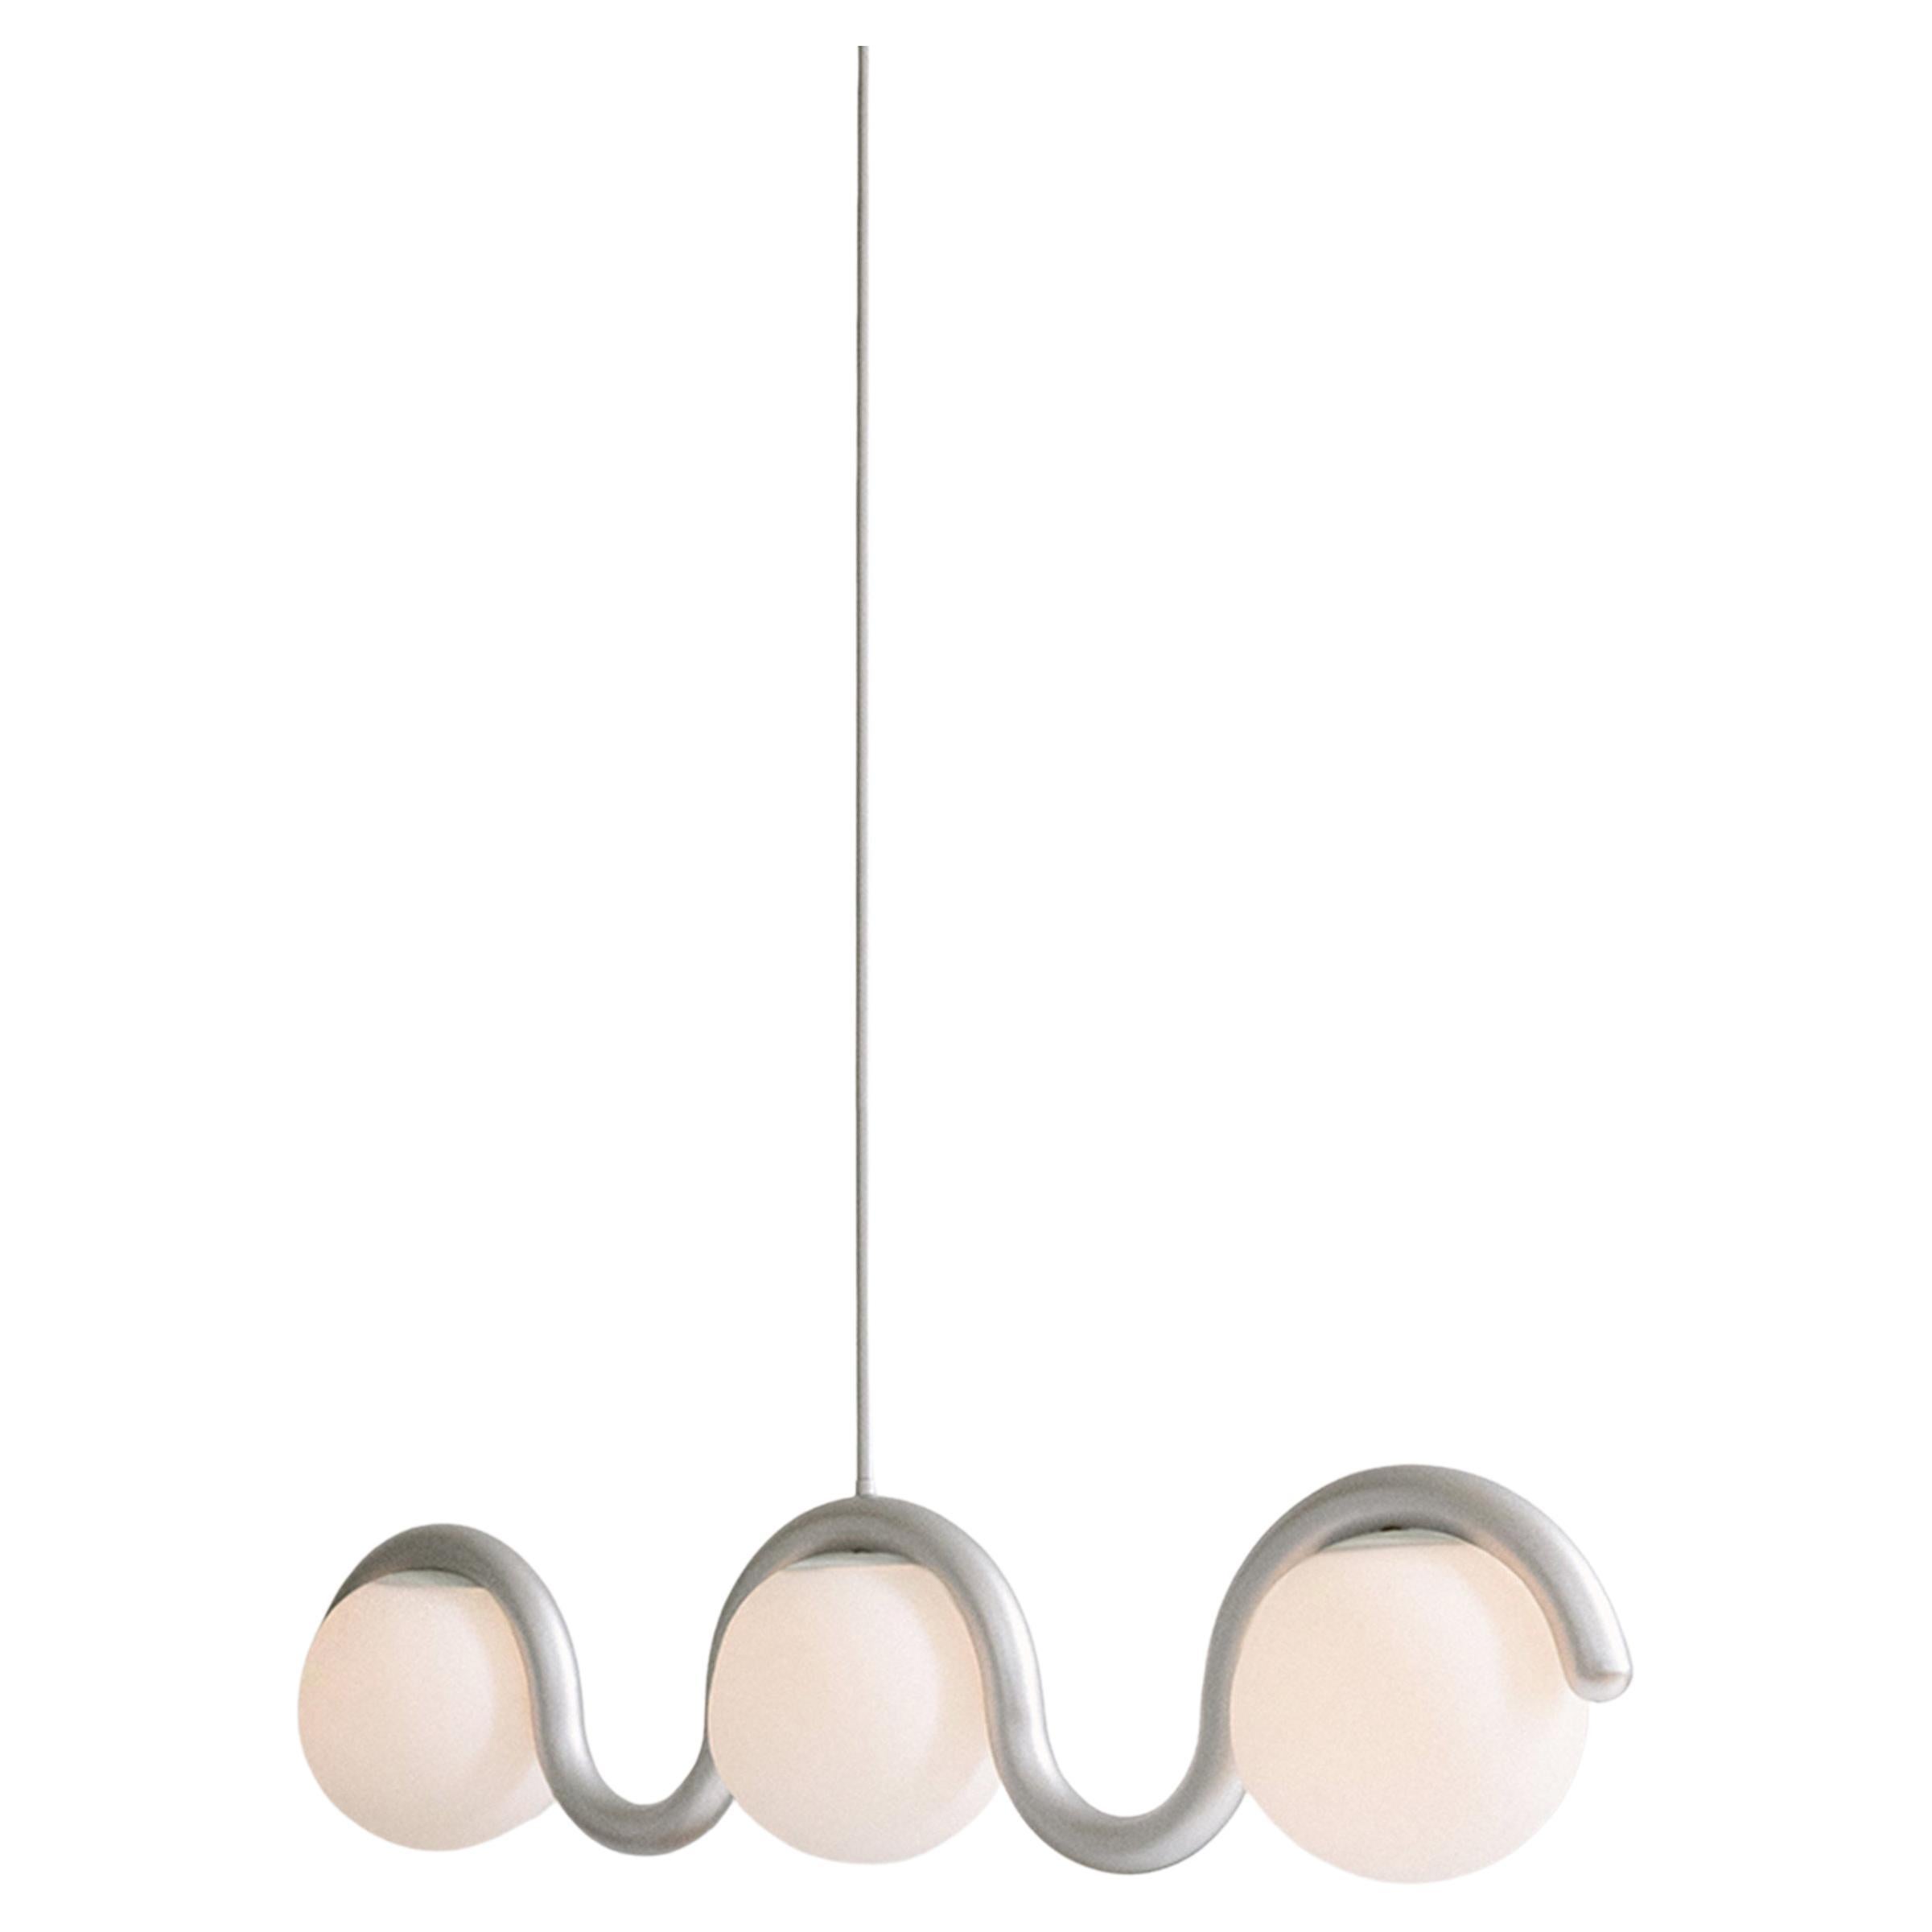 Contemporary 3 Globe Lenox Chandelier by Astraeus Clarke Made in Brooklyn, NY For Sale